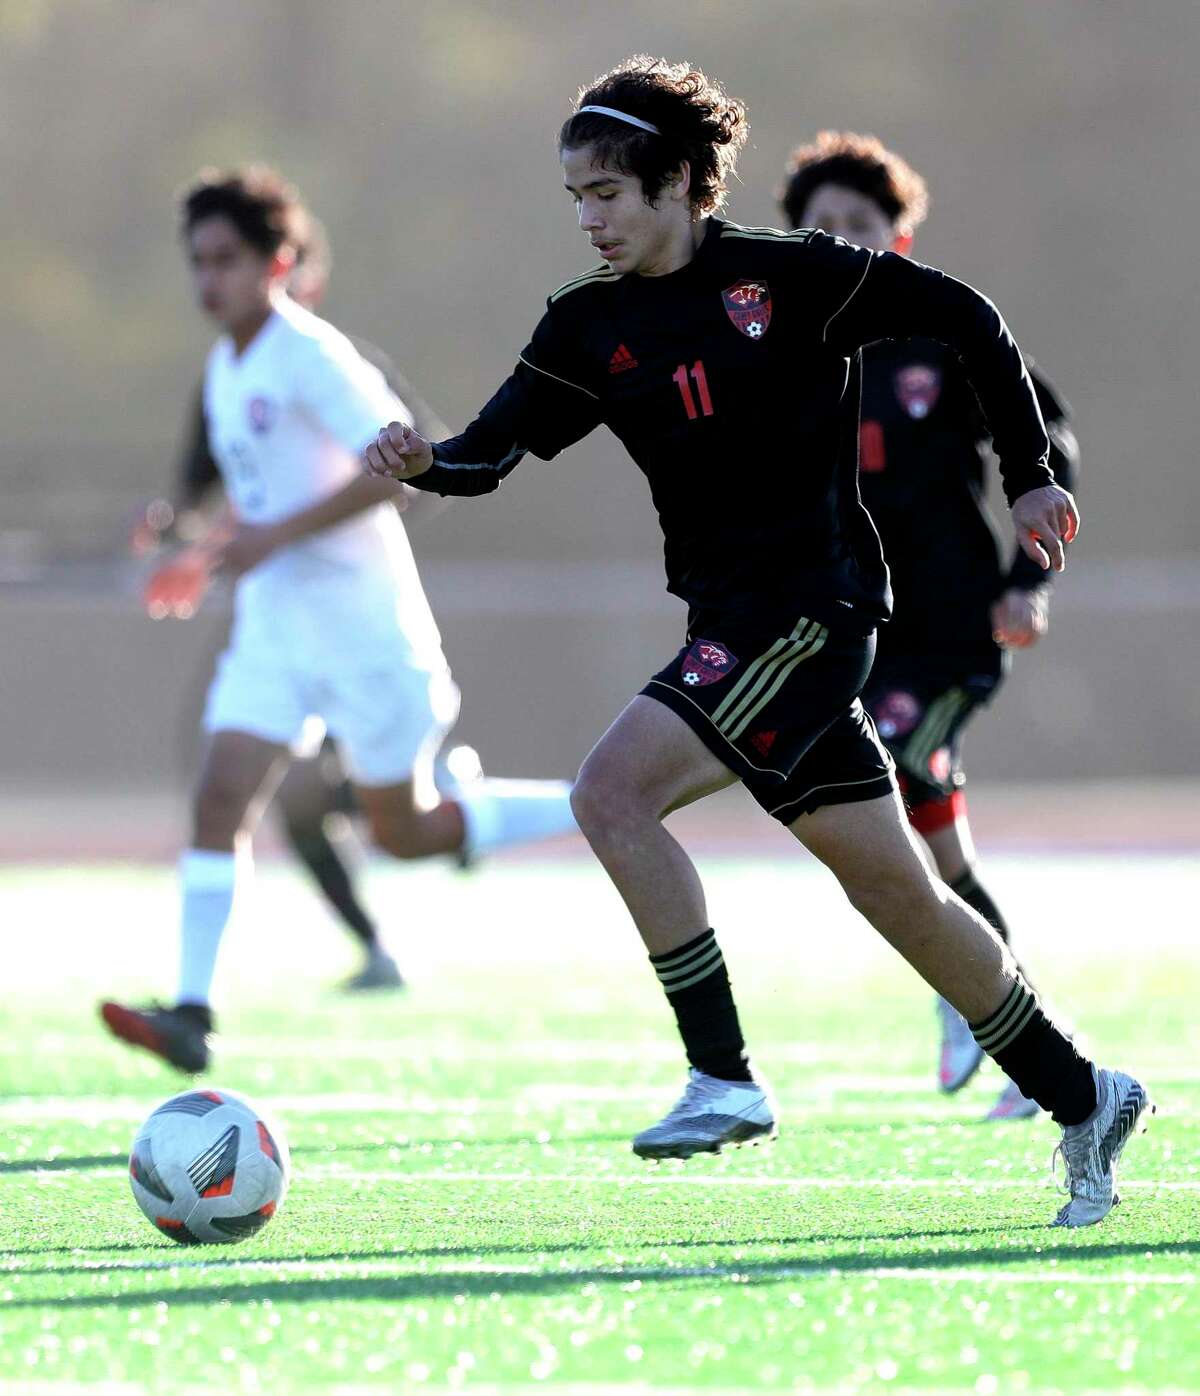 Caney Creek’s Jessy Villa (11) dribbles the ball in the first period of a soccer match during the Humble ISD Bayou City Classic at Kingwood High School, Friday, Jan. 15, 2021, in Kingwood.